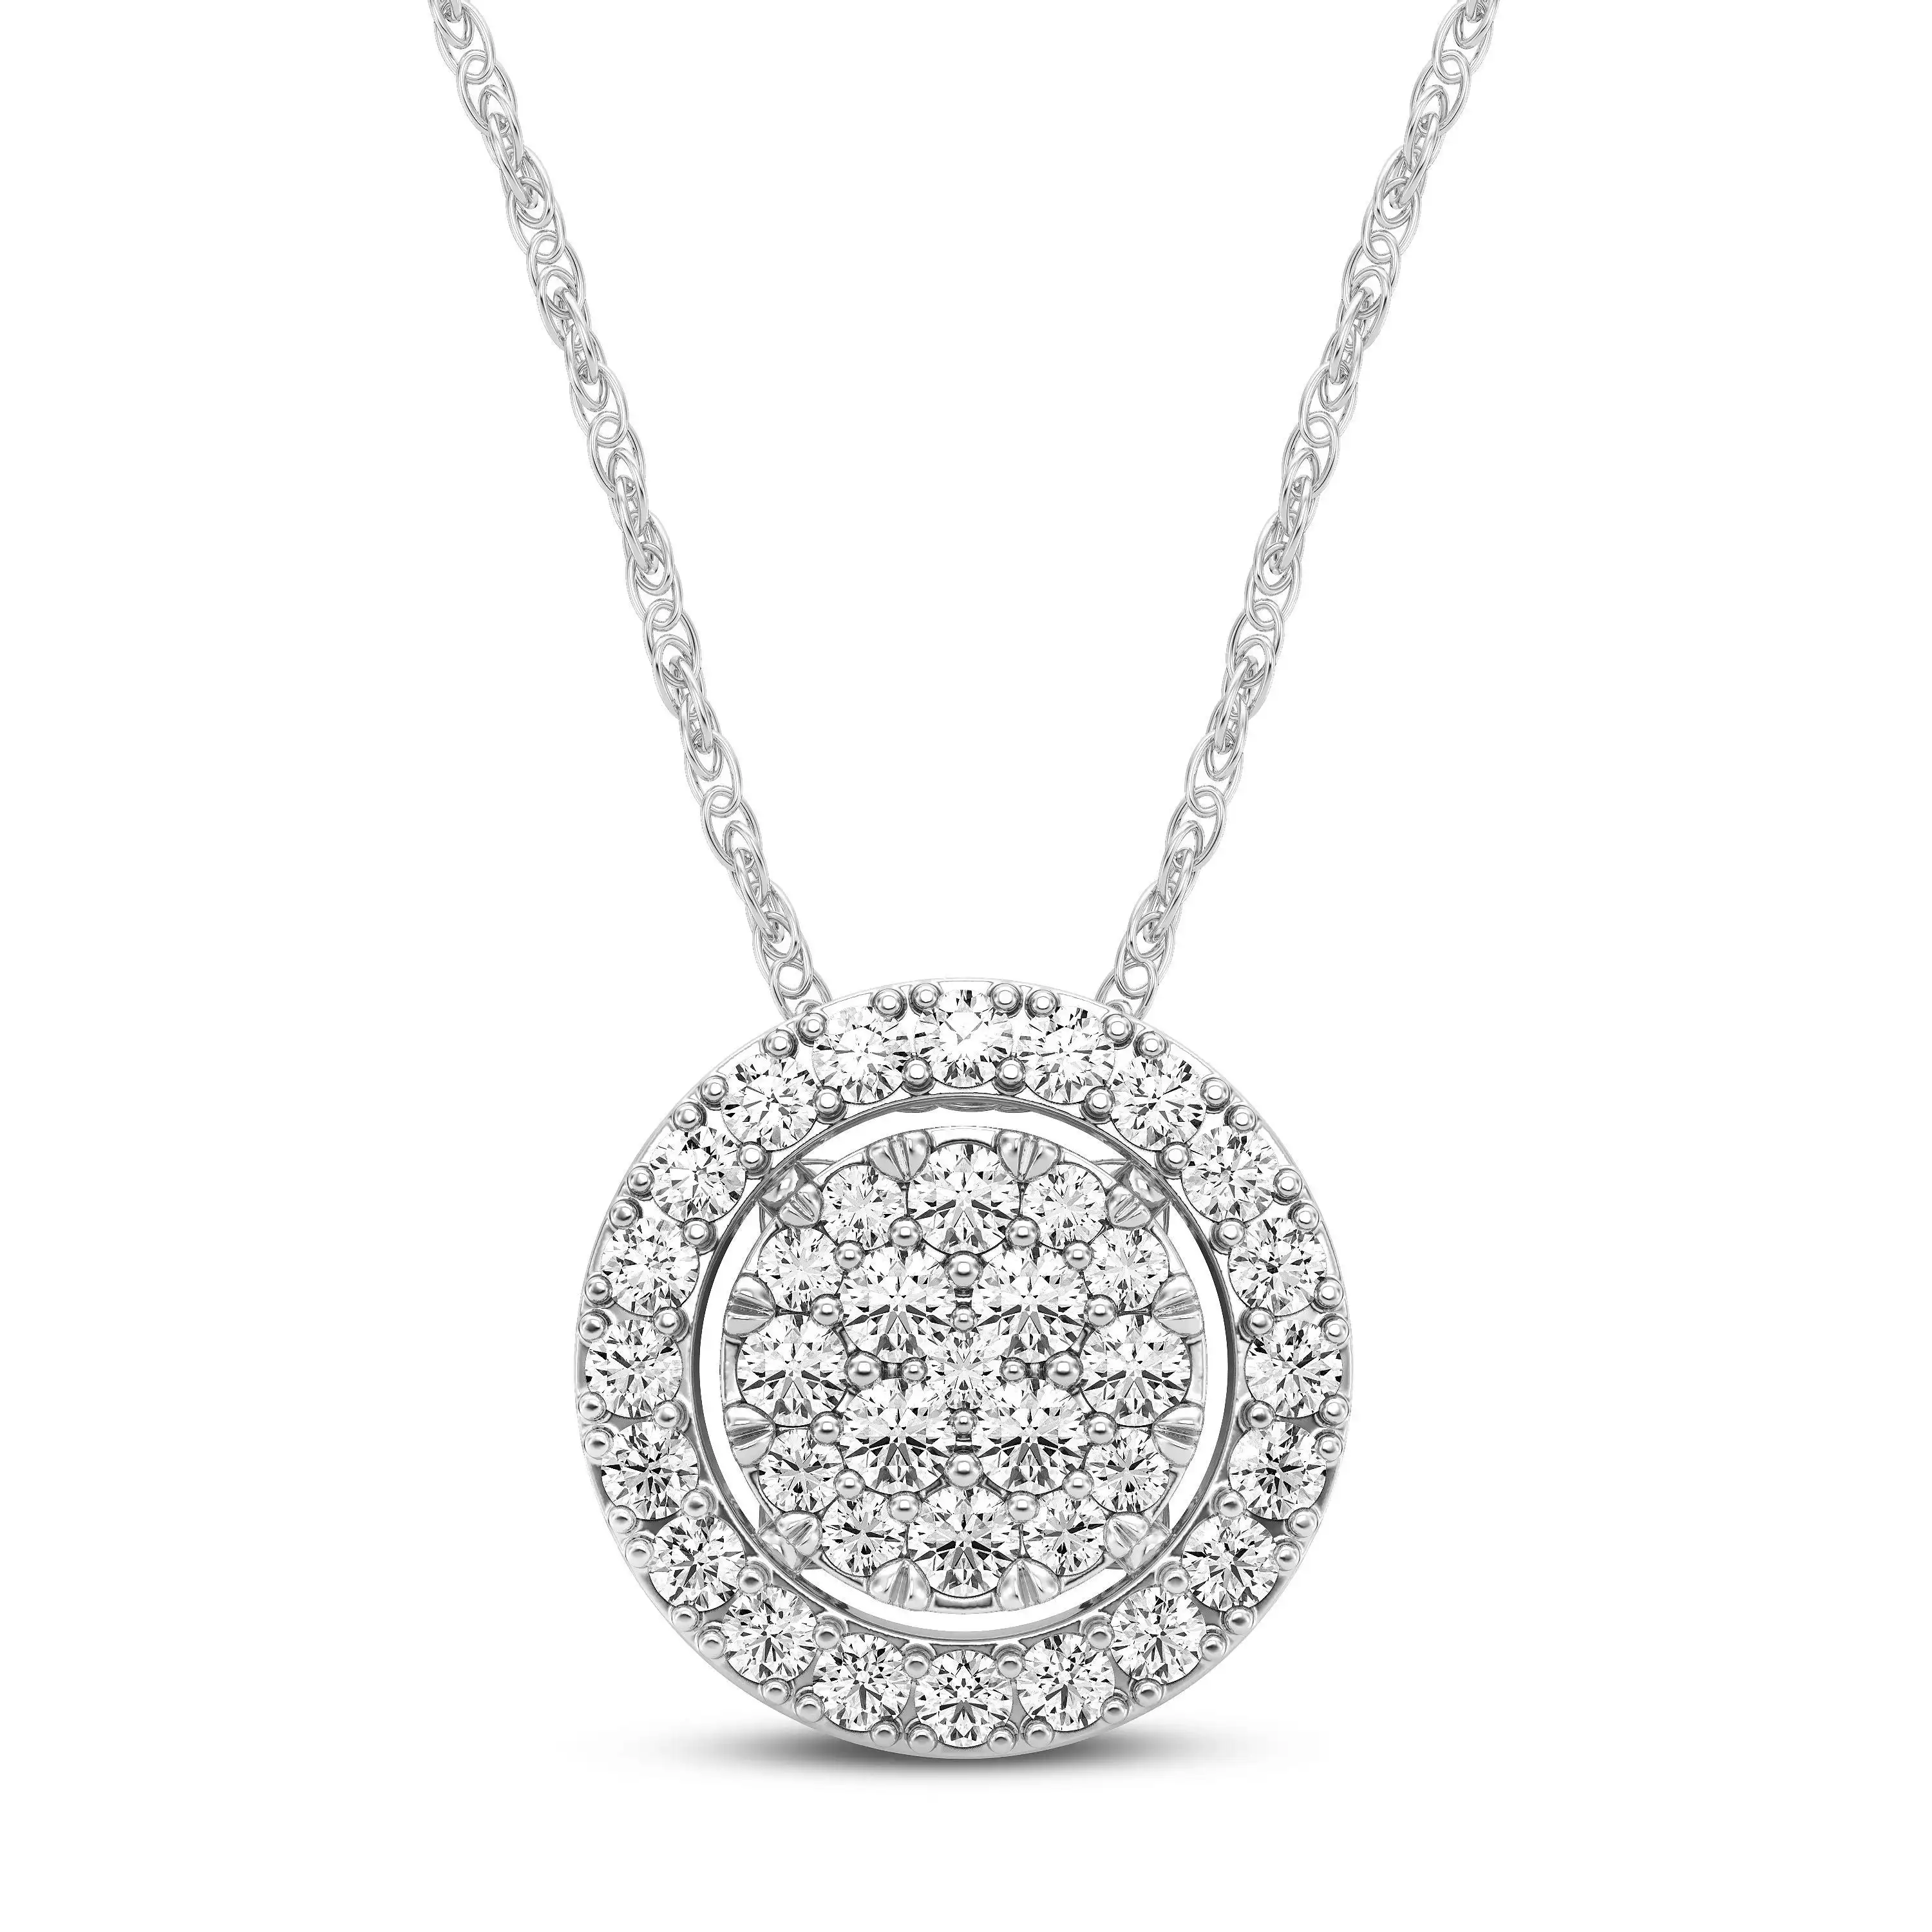 Mirage Halo Necklace with 1/2ct of Laboratory Grown Diamonds in Sterling Silver and Platinum